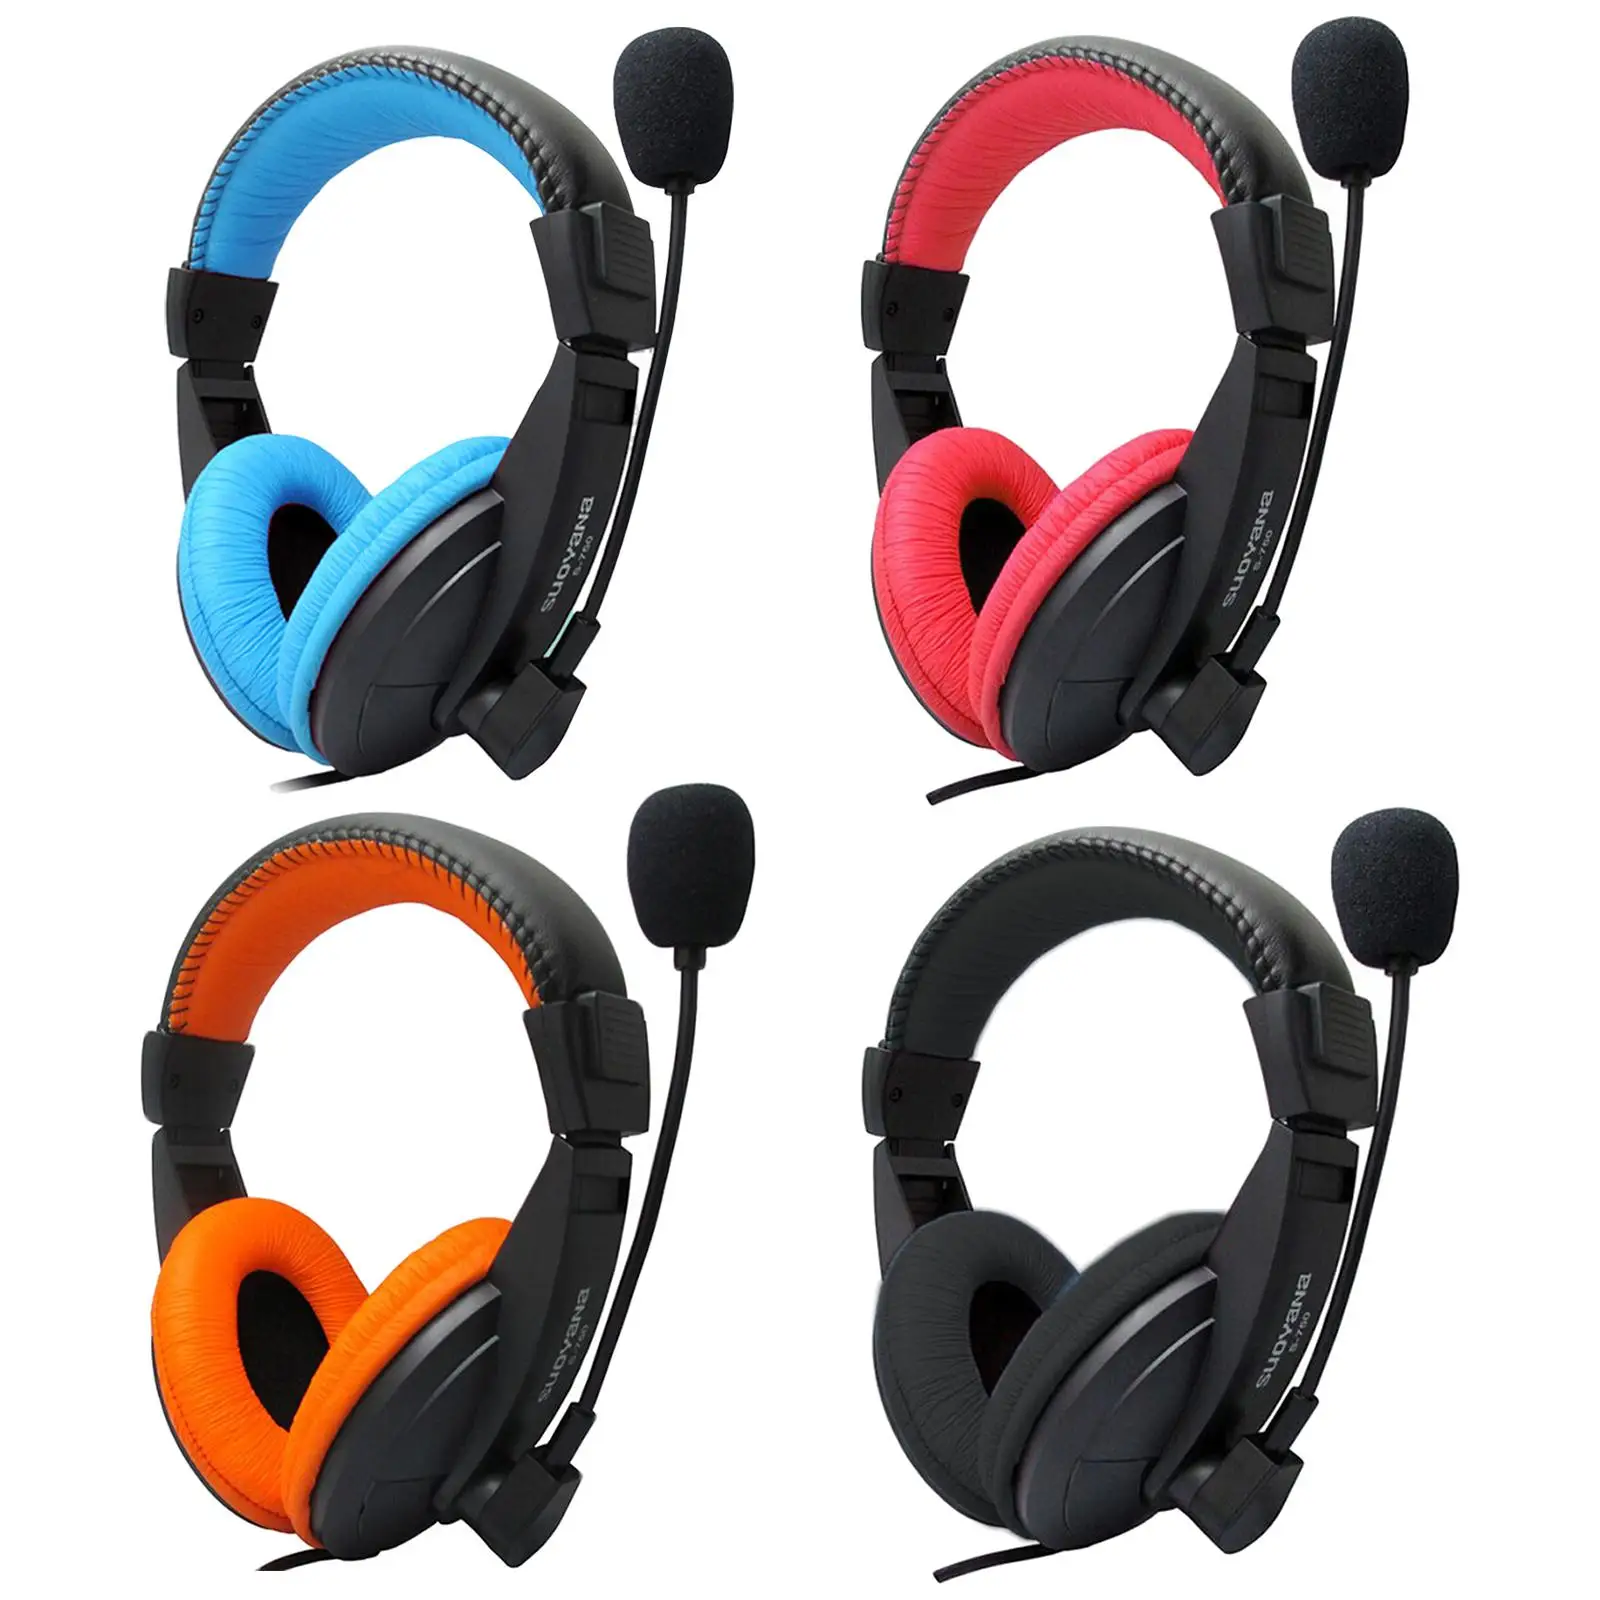 Wired Over-Ear Gaming Headset Comfortable Lightweight for Laptop PC Home